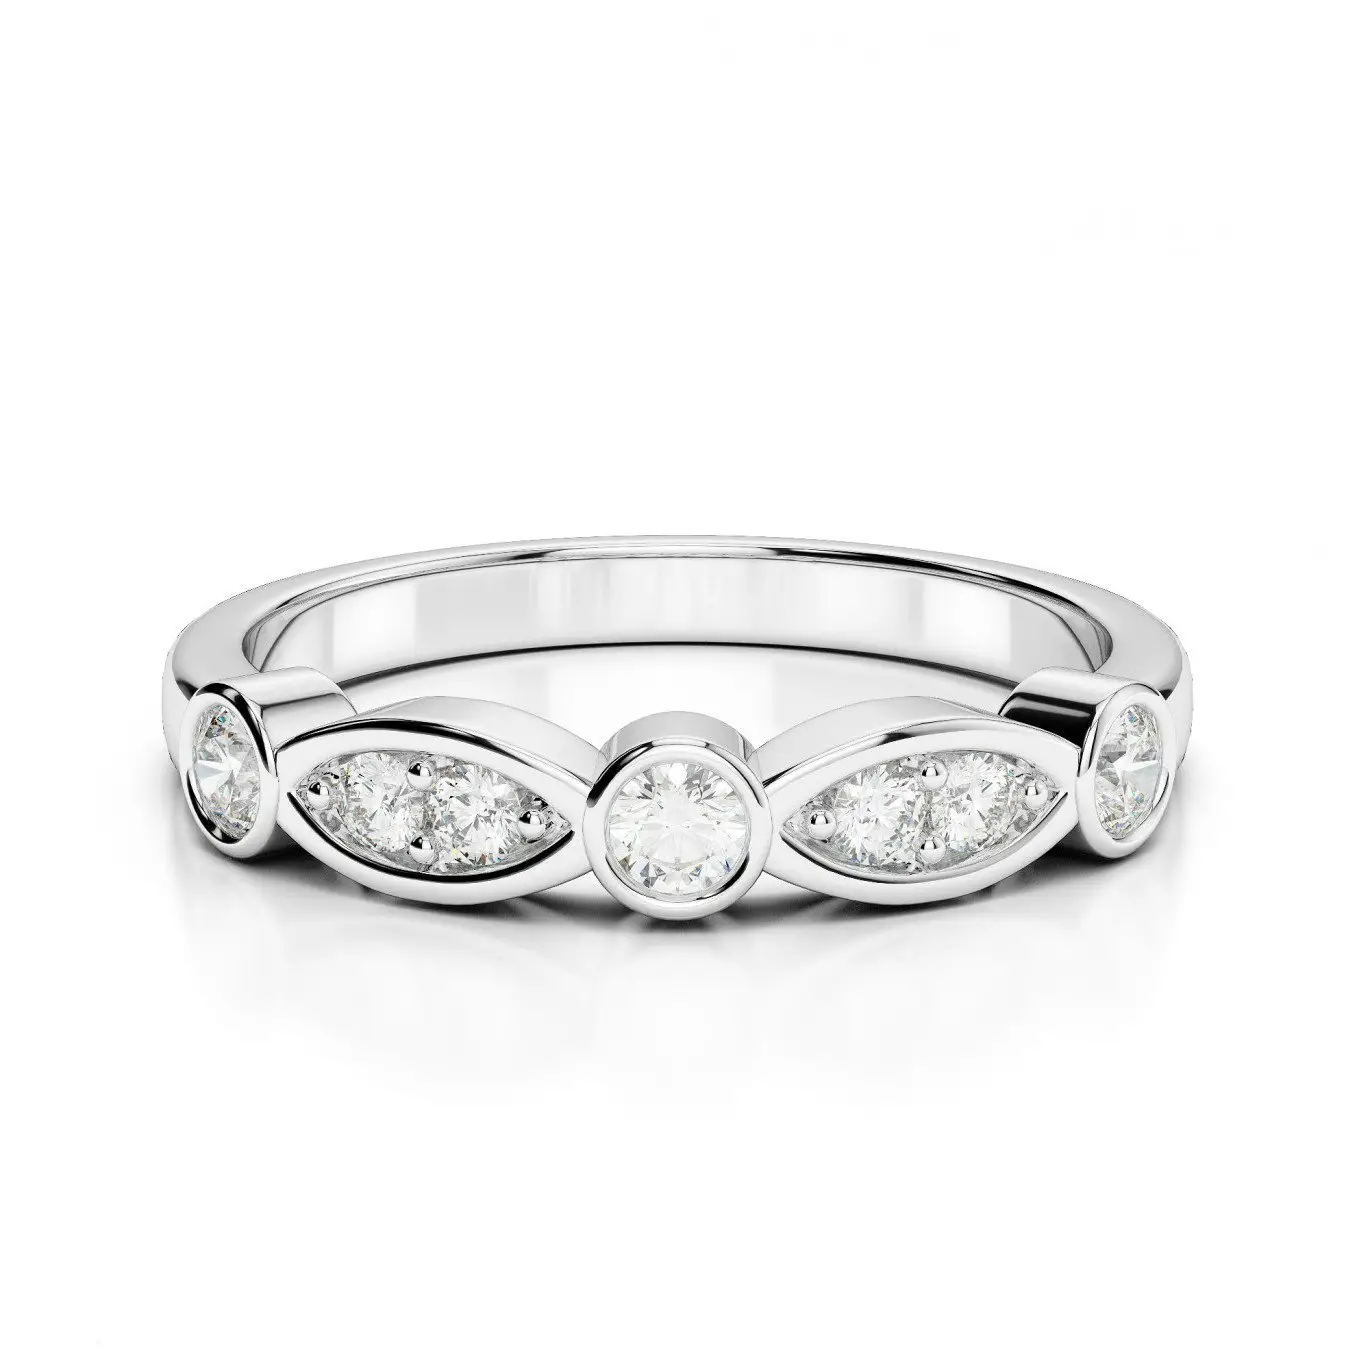 25 Photo of Marquise And Round Diamond Alternating Anniversary Bands In ...